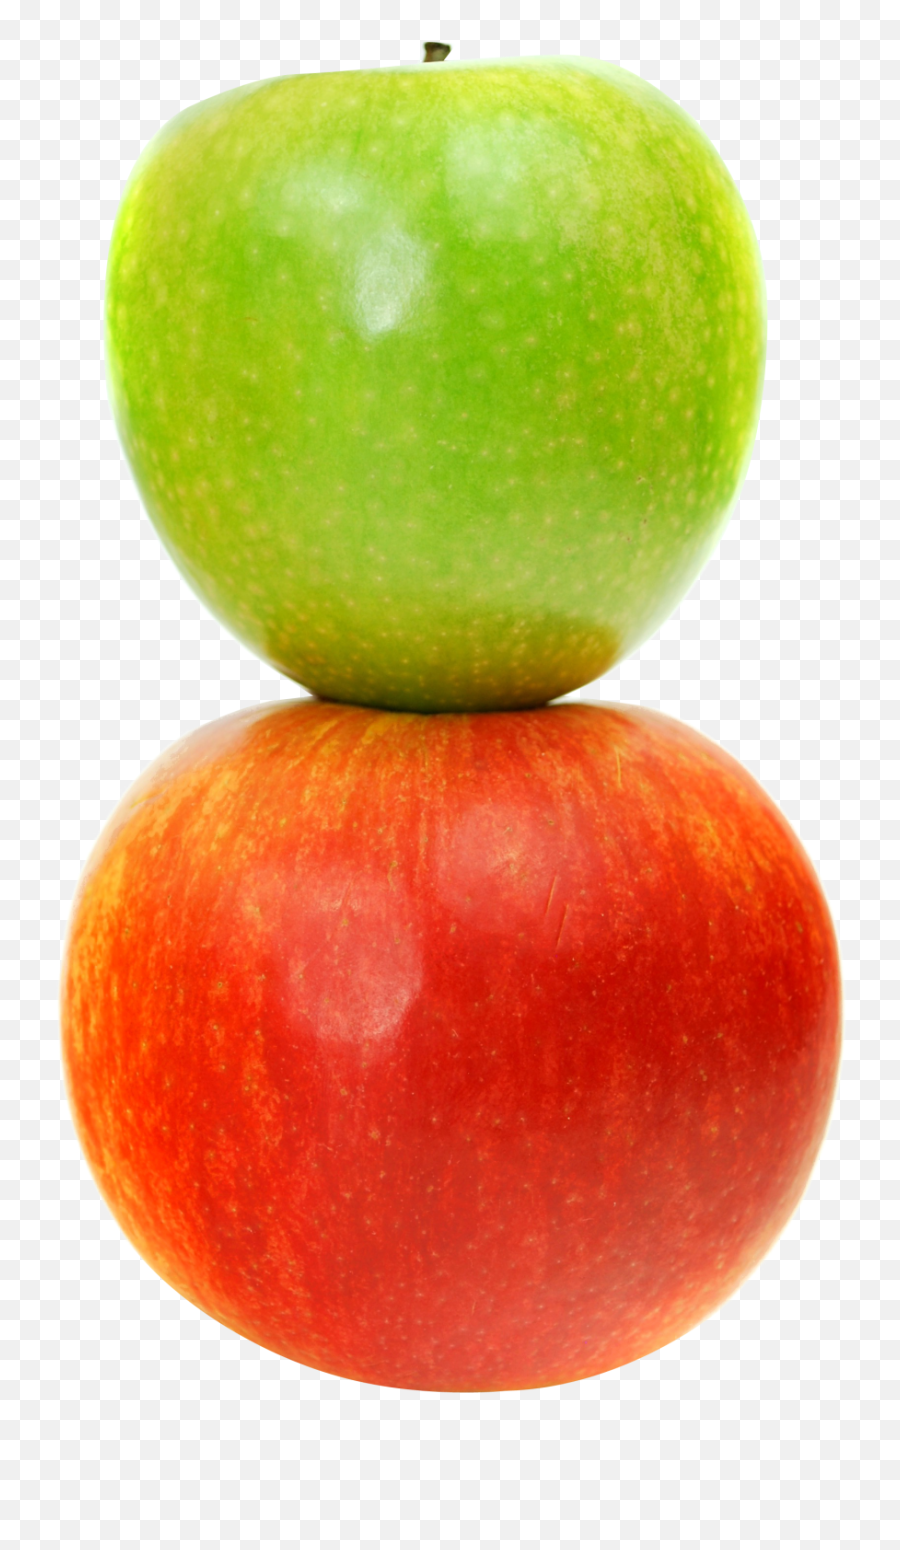 Double Apples Png Image - Purepng Free Transparent Cc0 Png Double Apple Png,Apples Transparent Background